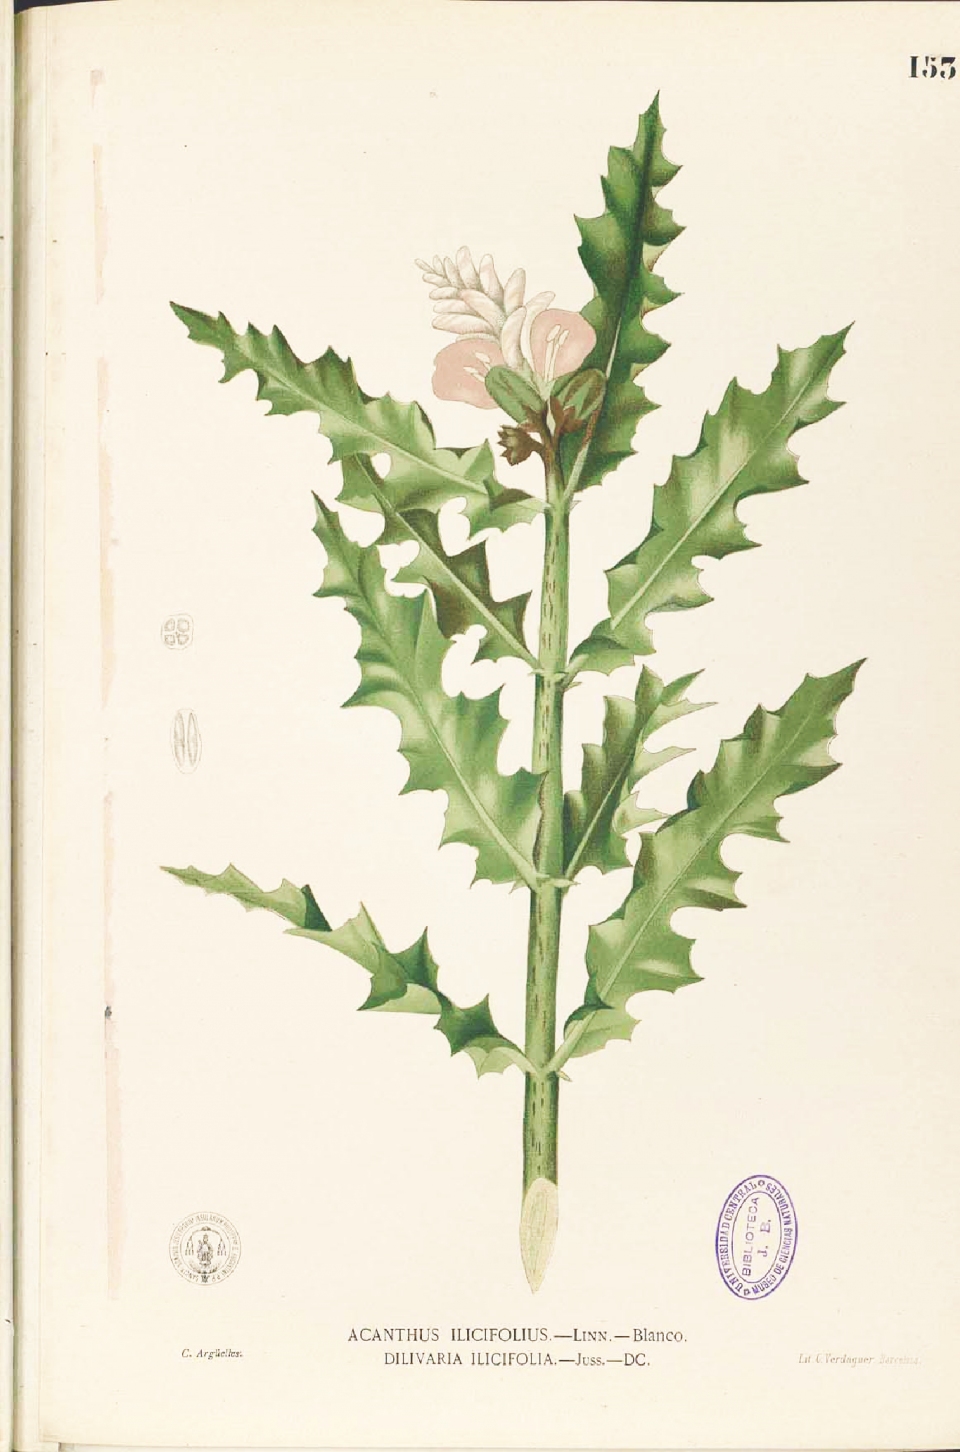 Drawing of the flowering stem Photograph by: Blanco, M., Flora de Filipinas, t. 153 (1875)